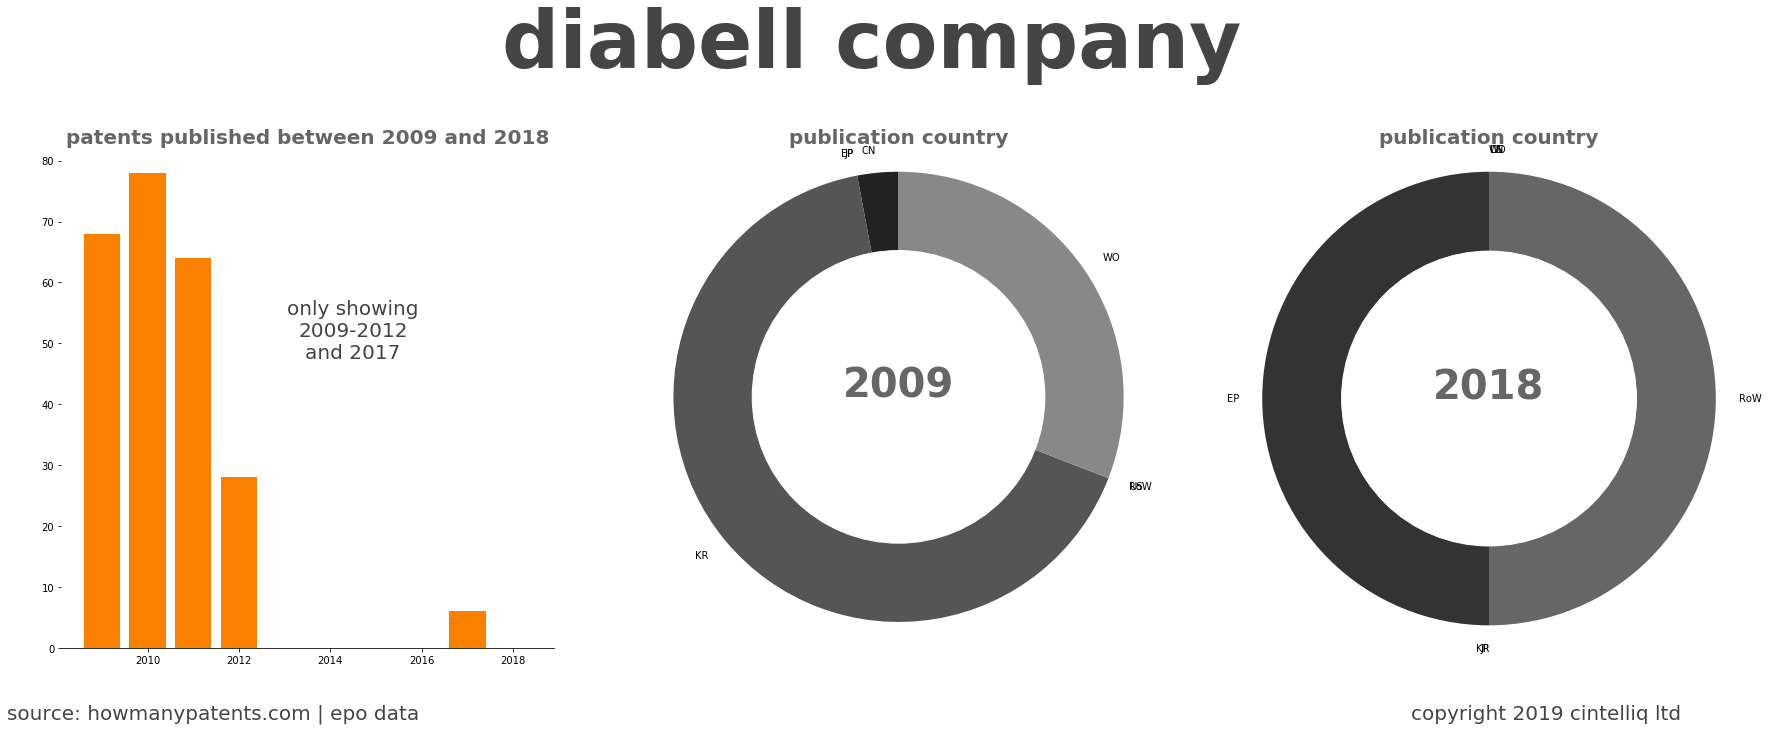 summary of patents for Diabell Company